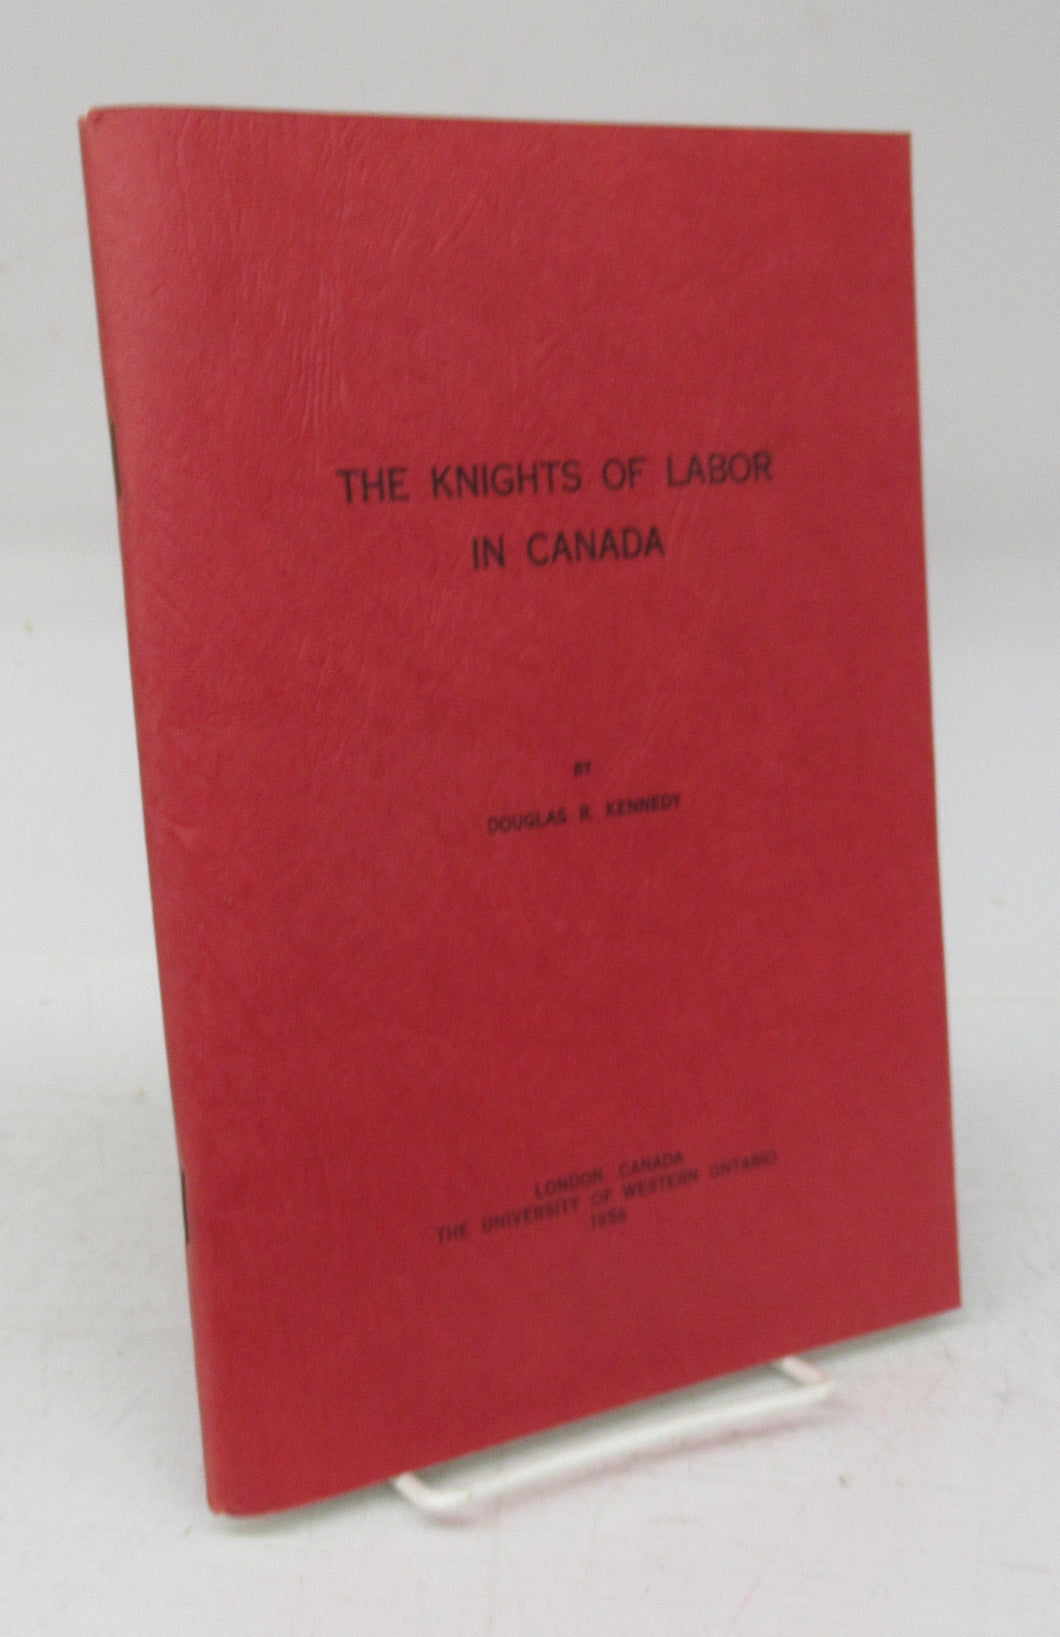 The Knights of Labor in Canada